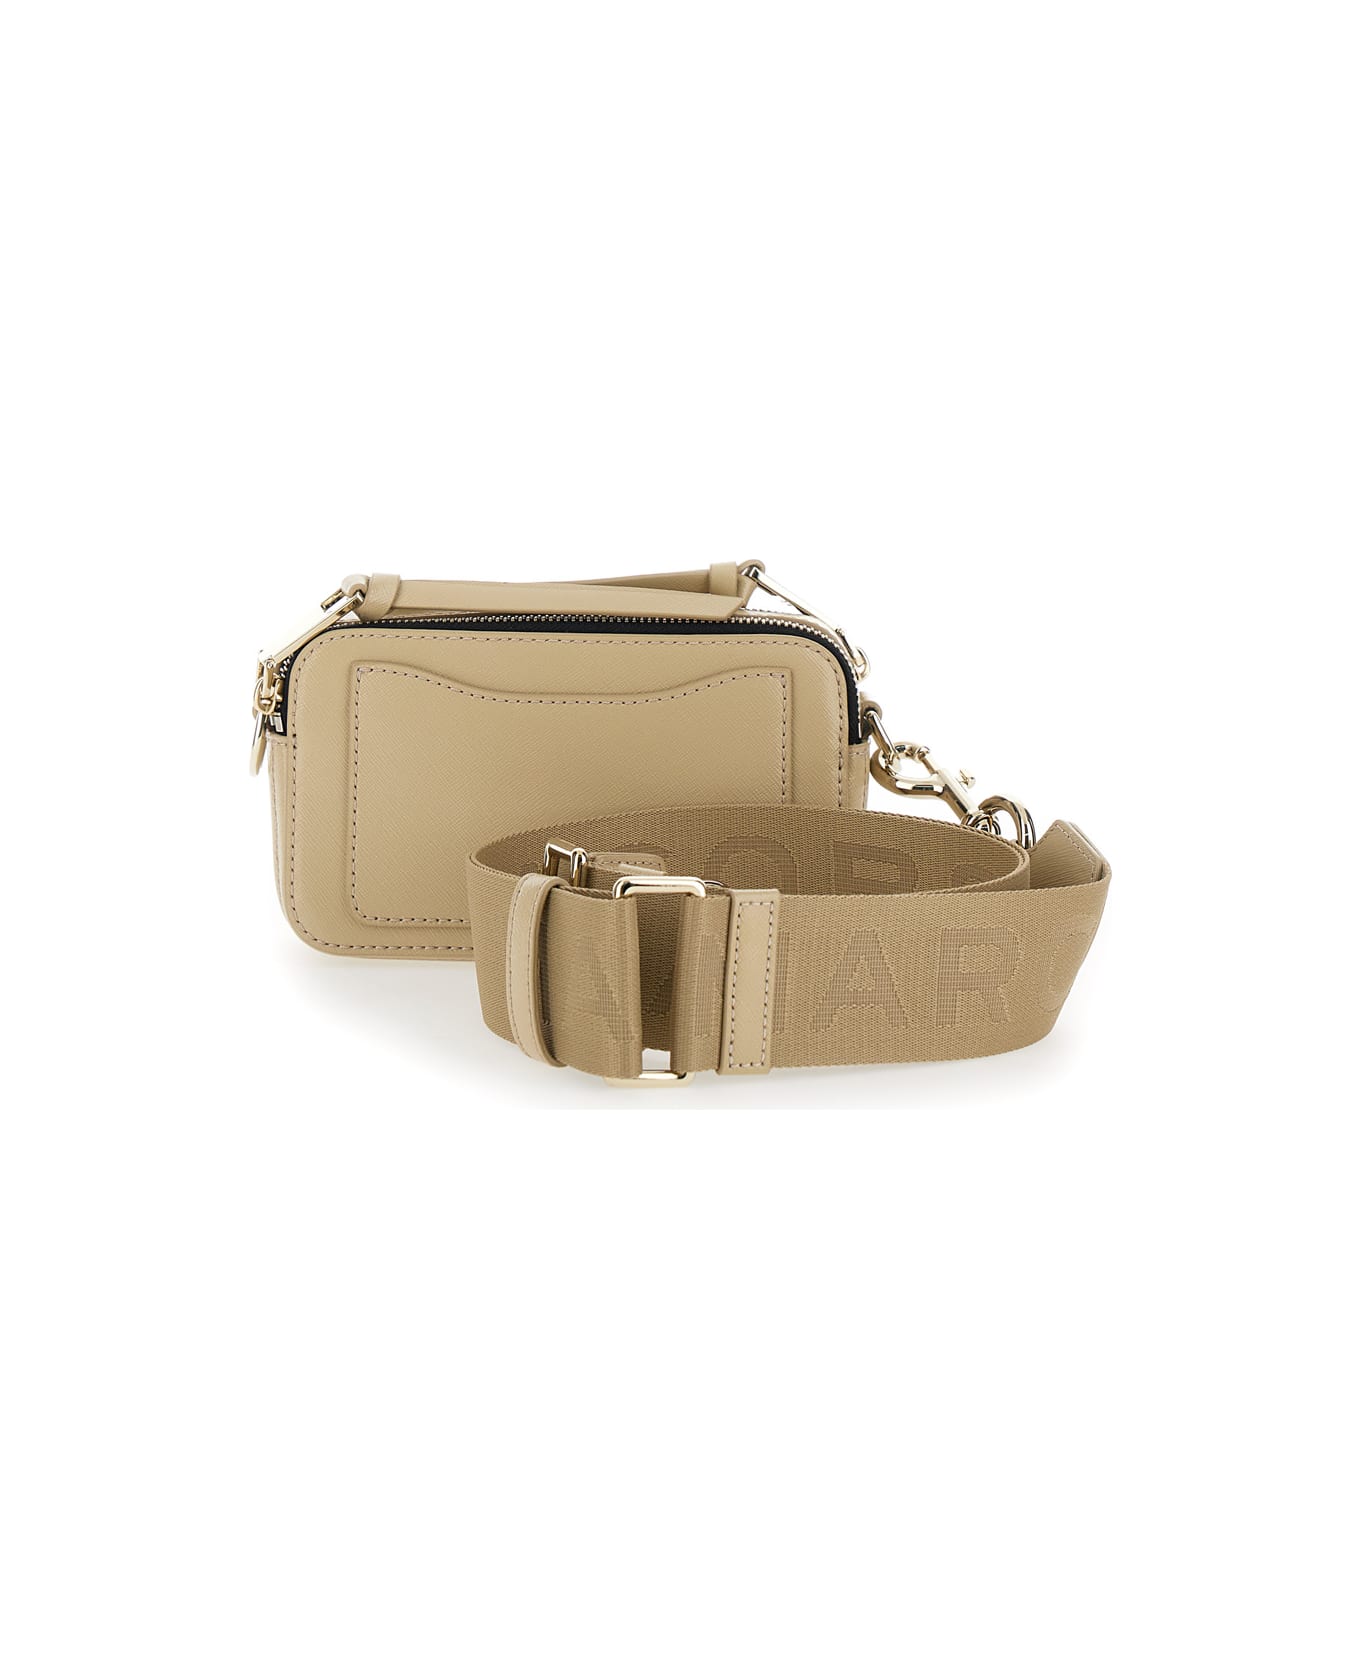 Marc Jacobs 'the Snapshot' Beige Shoulder Bag With Metal Logo At The Front In Leather Woman - Beige